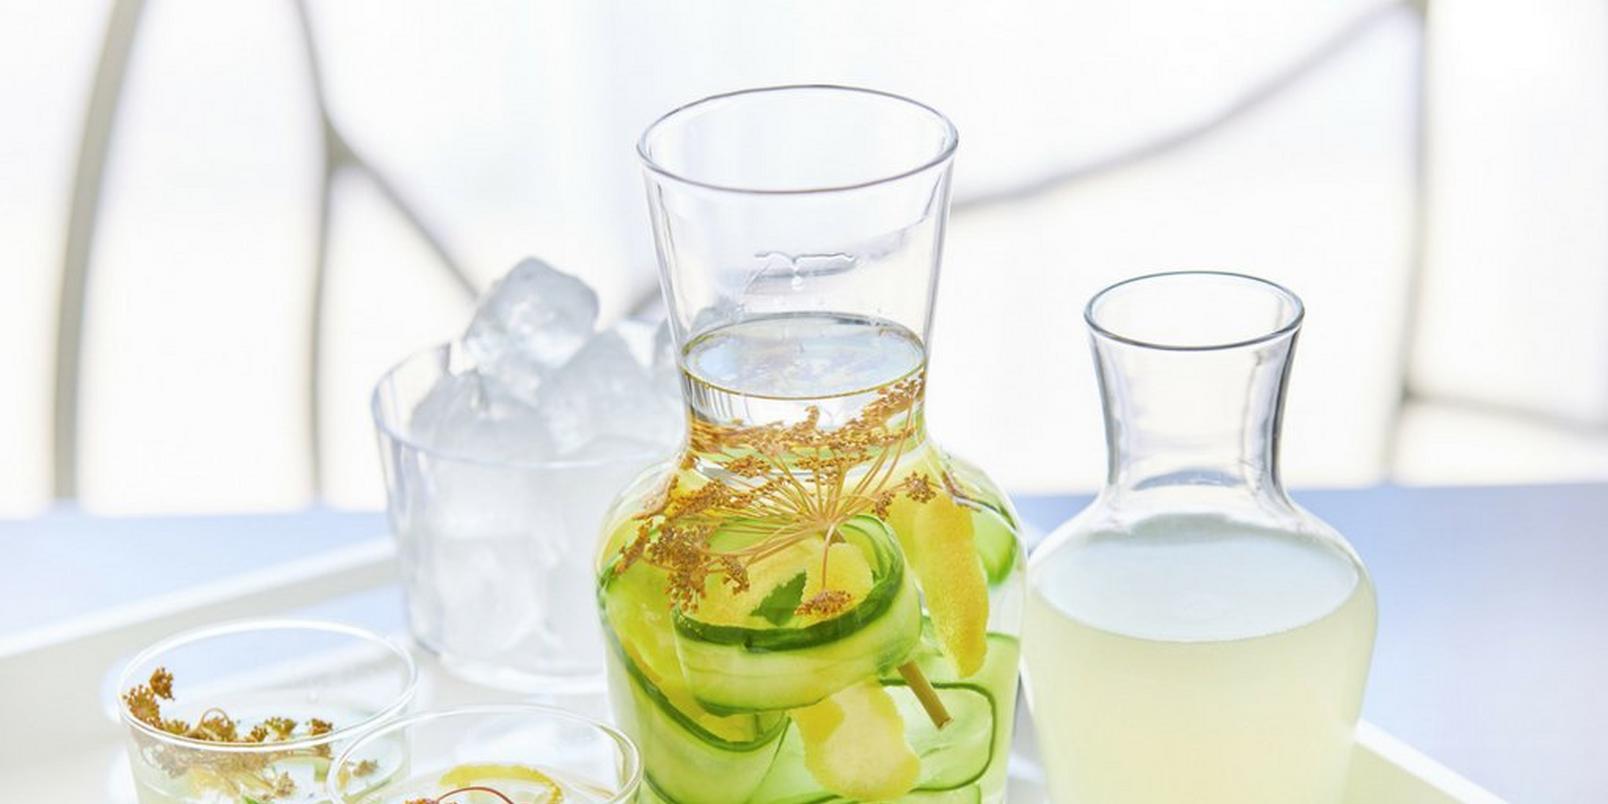 Cucumber-lemon-and-fennel-flower-gin-cocktail